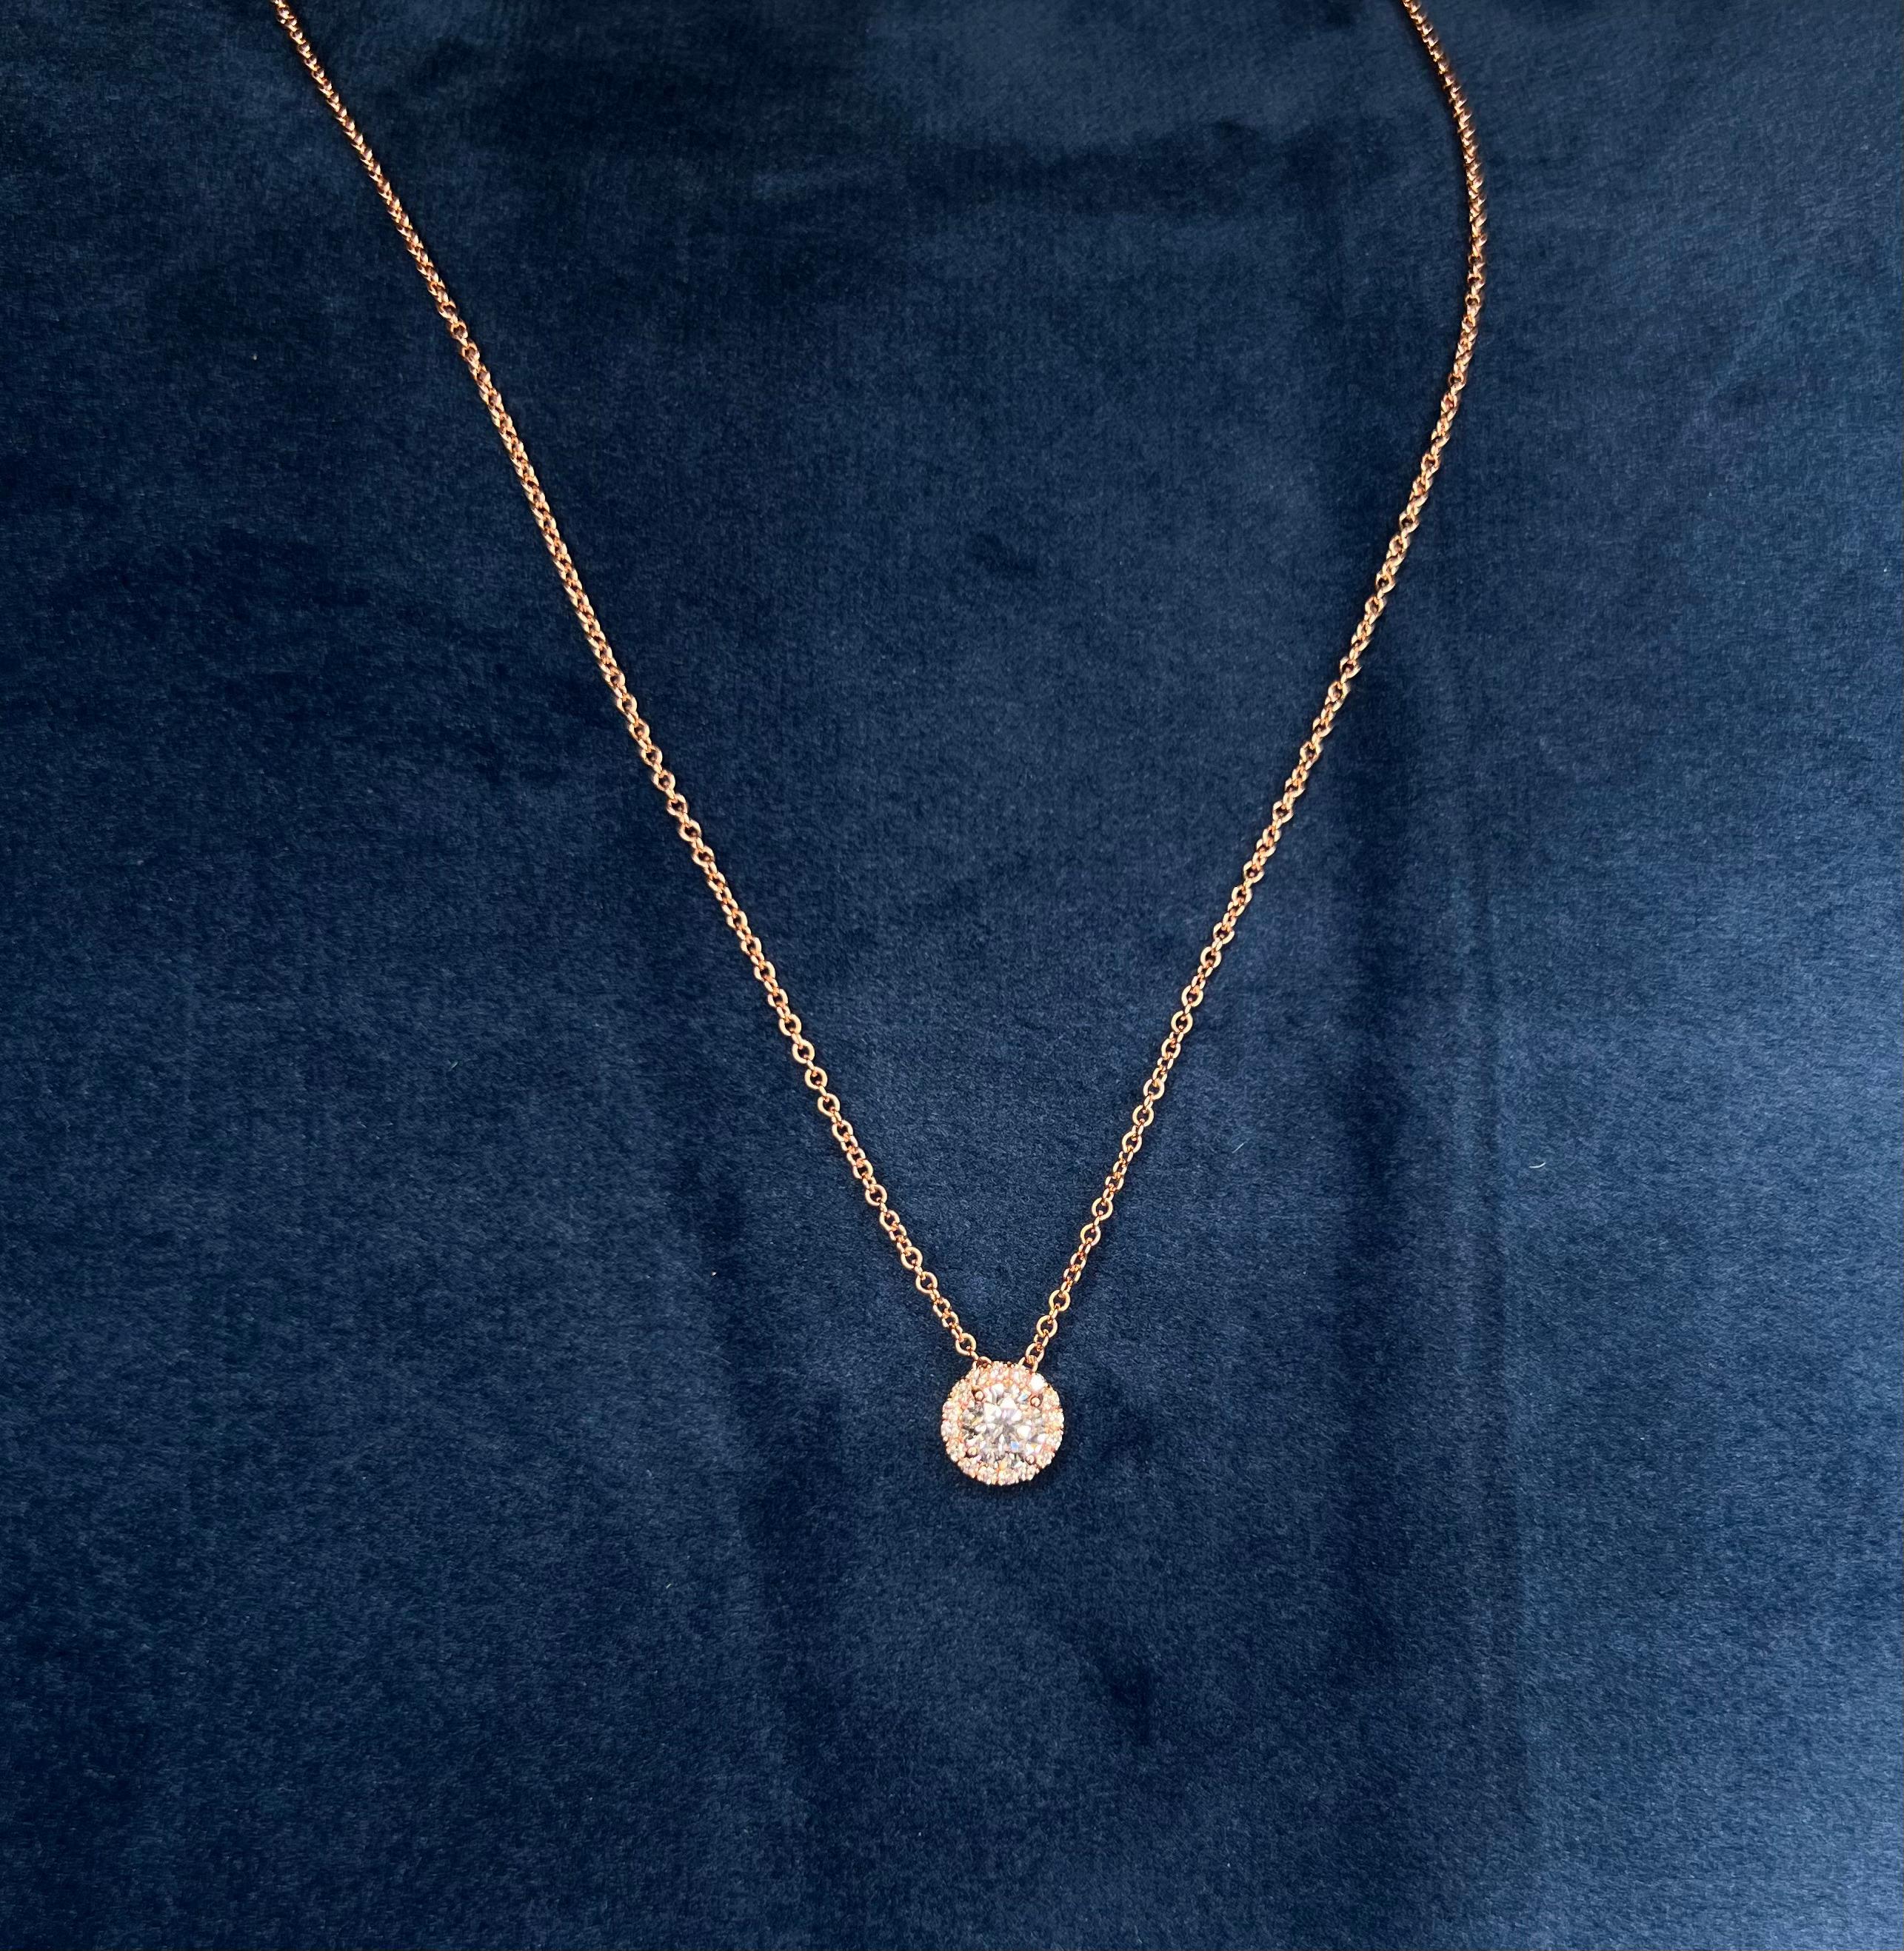 14k Yellow Gold 0.65 Carat Round Cut Diamond Solitaire Pendant Necklace In New Condition For Sale In Los Angeles, CA